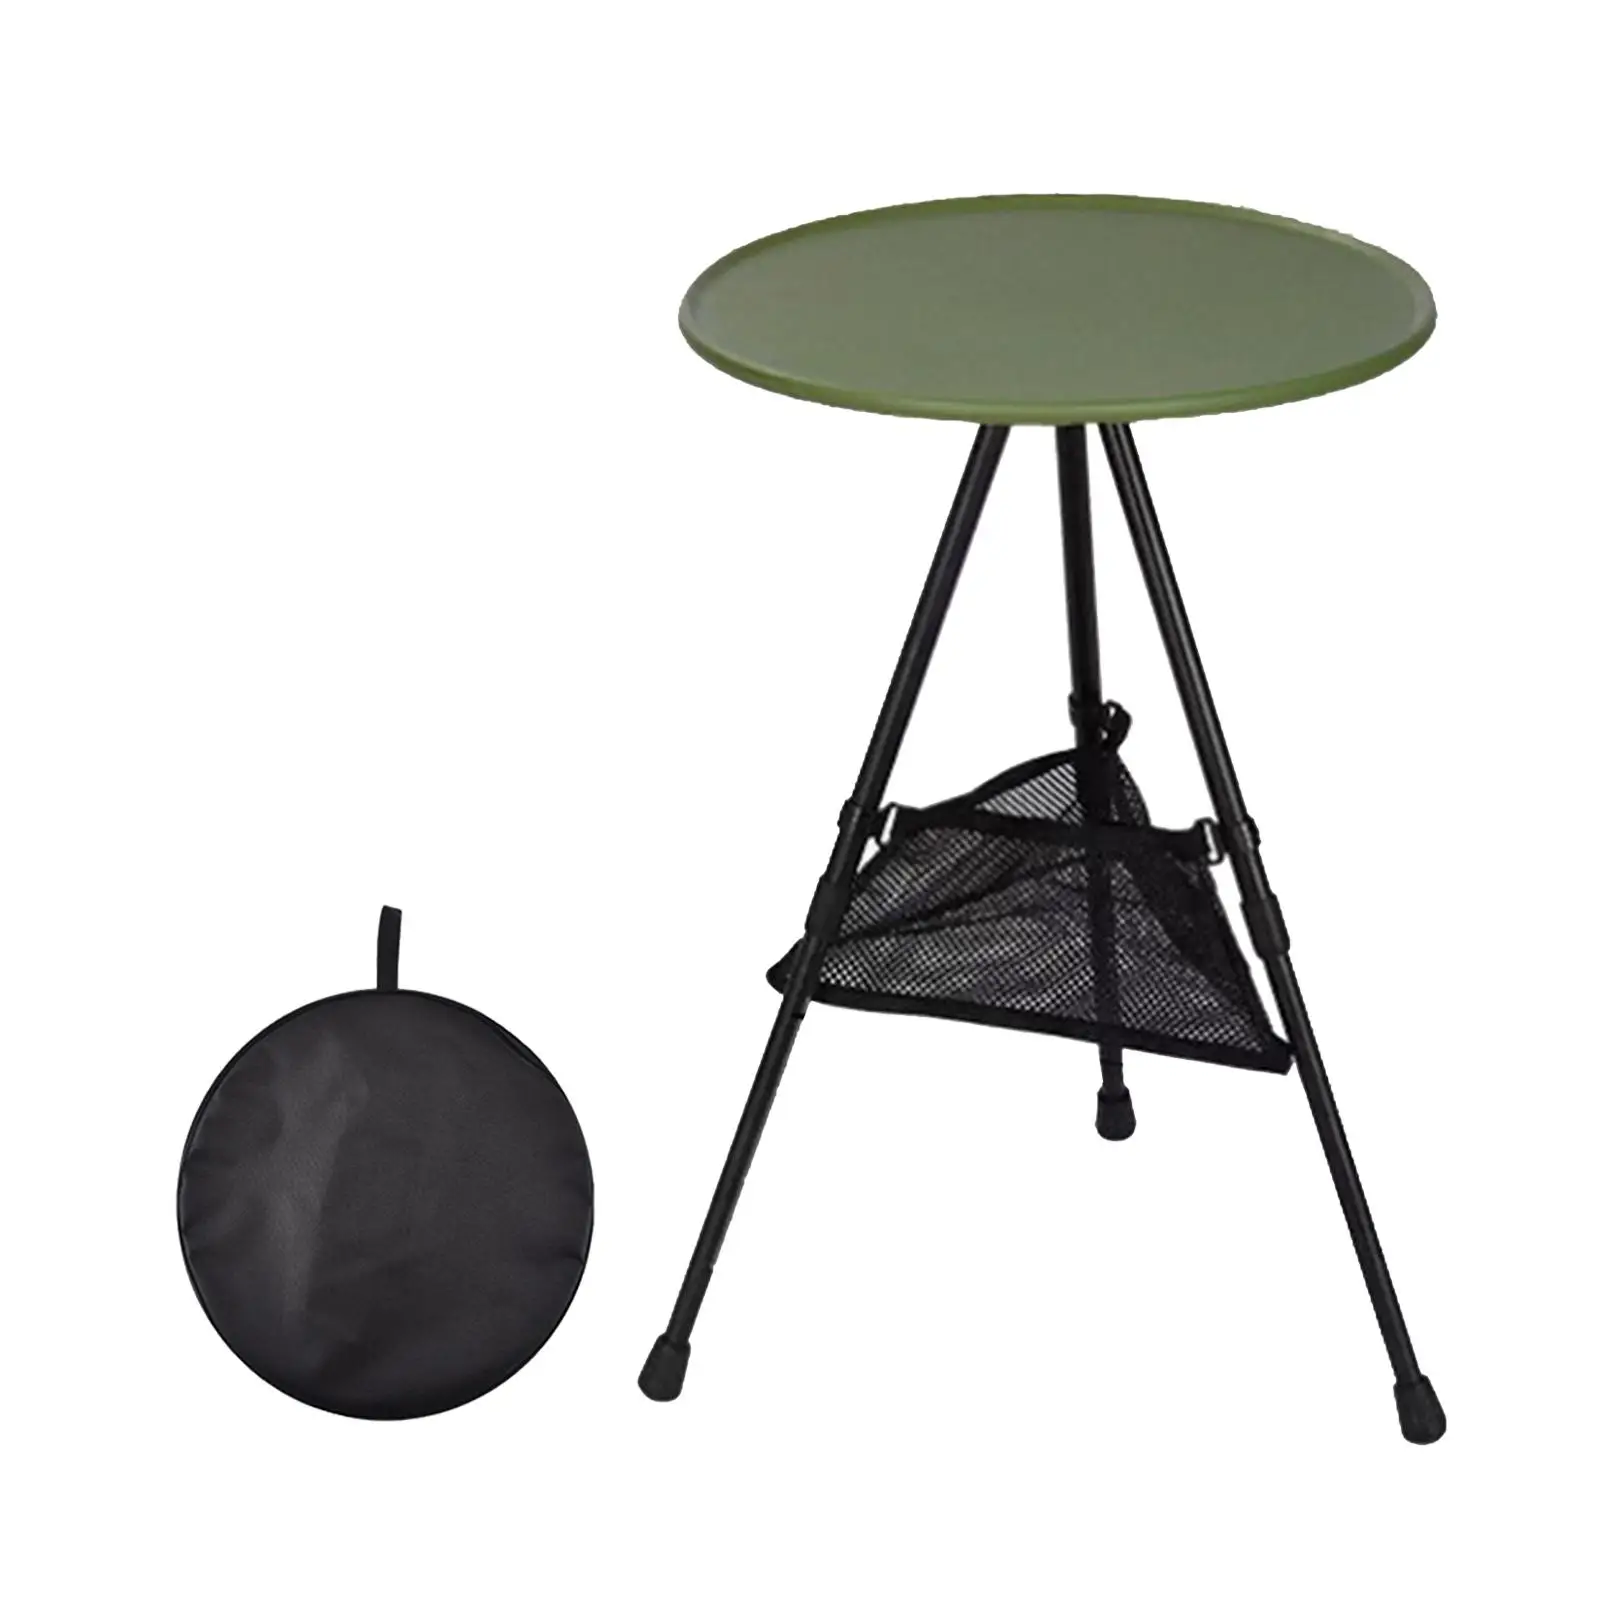 Outdoor Round Table Camping Table Coffee Tea Table Portable Compact Liftable Table Foldable Picnic Table for Yard Outdoor Beach